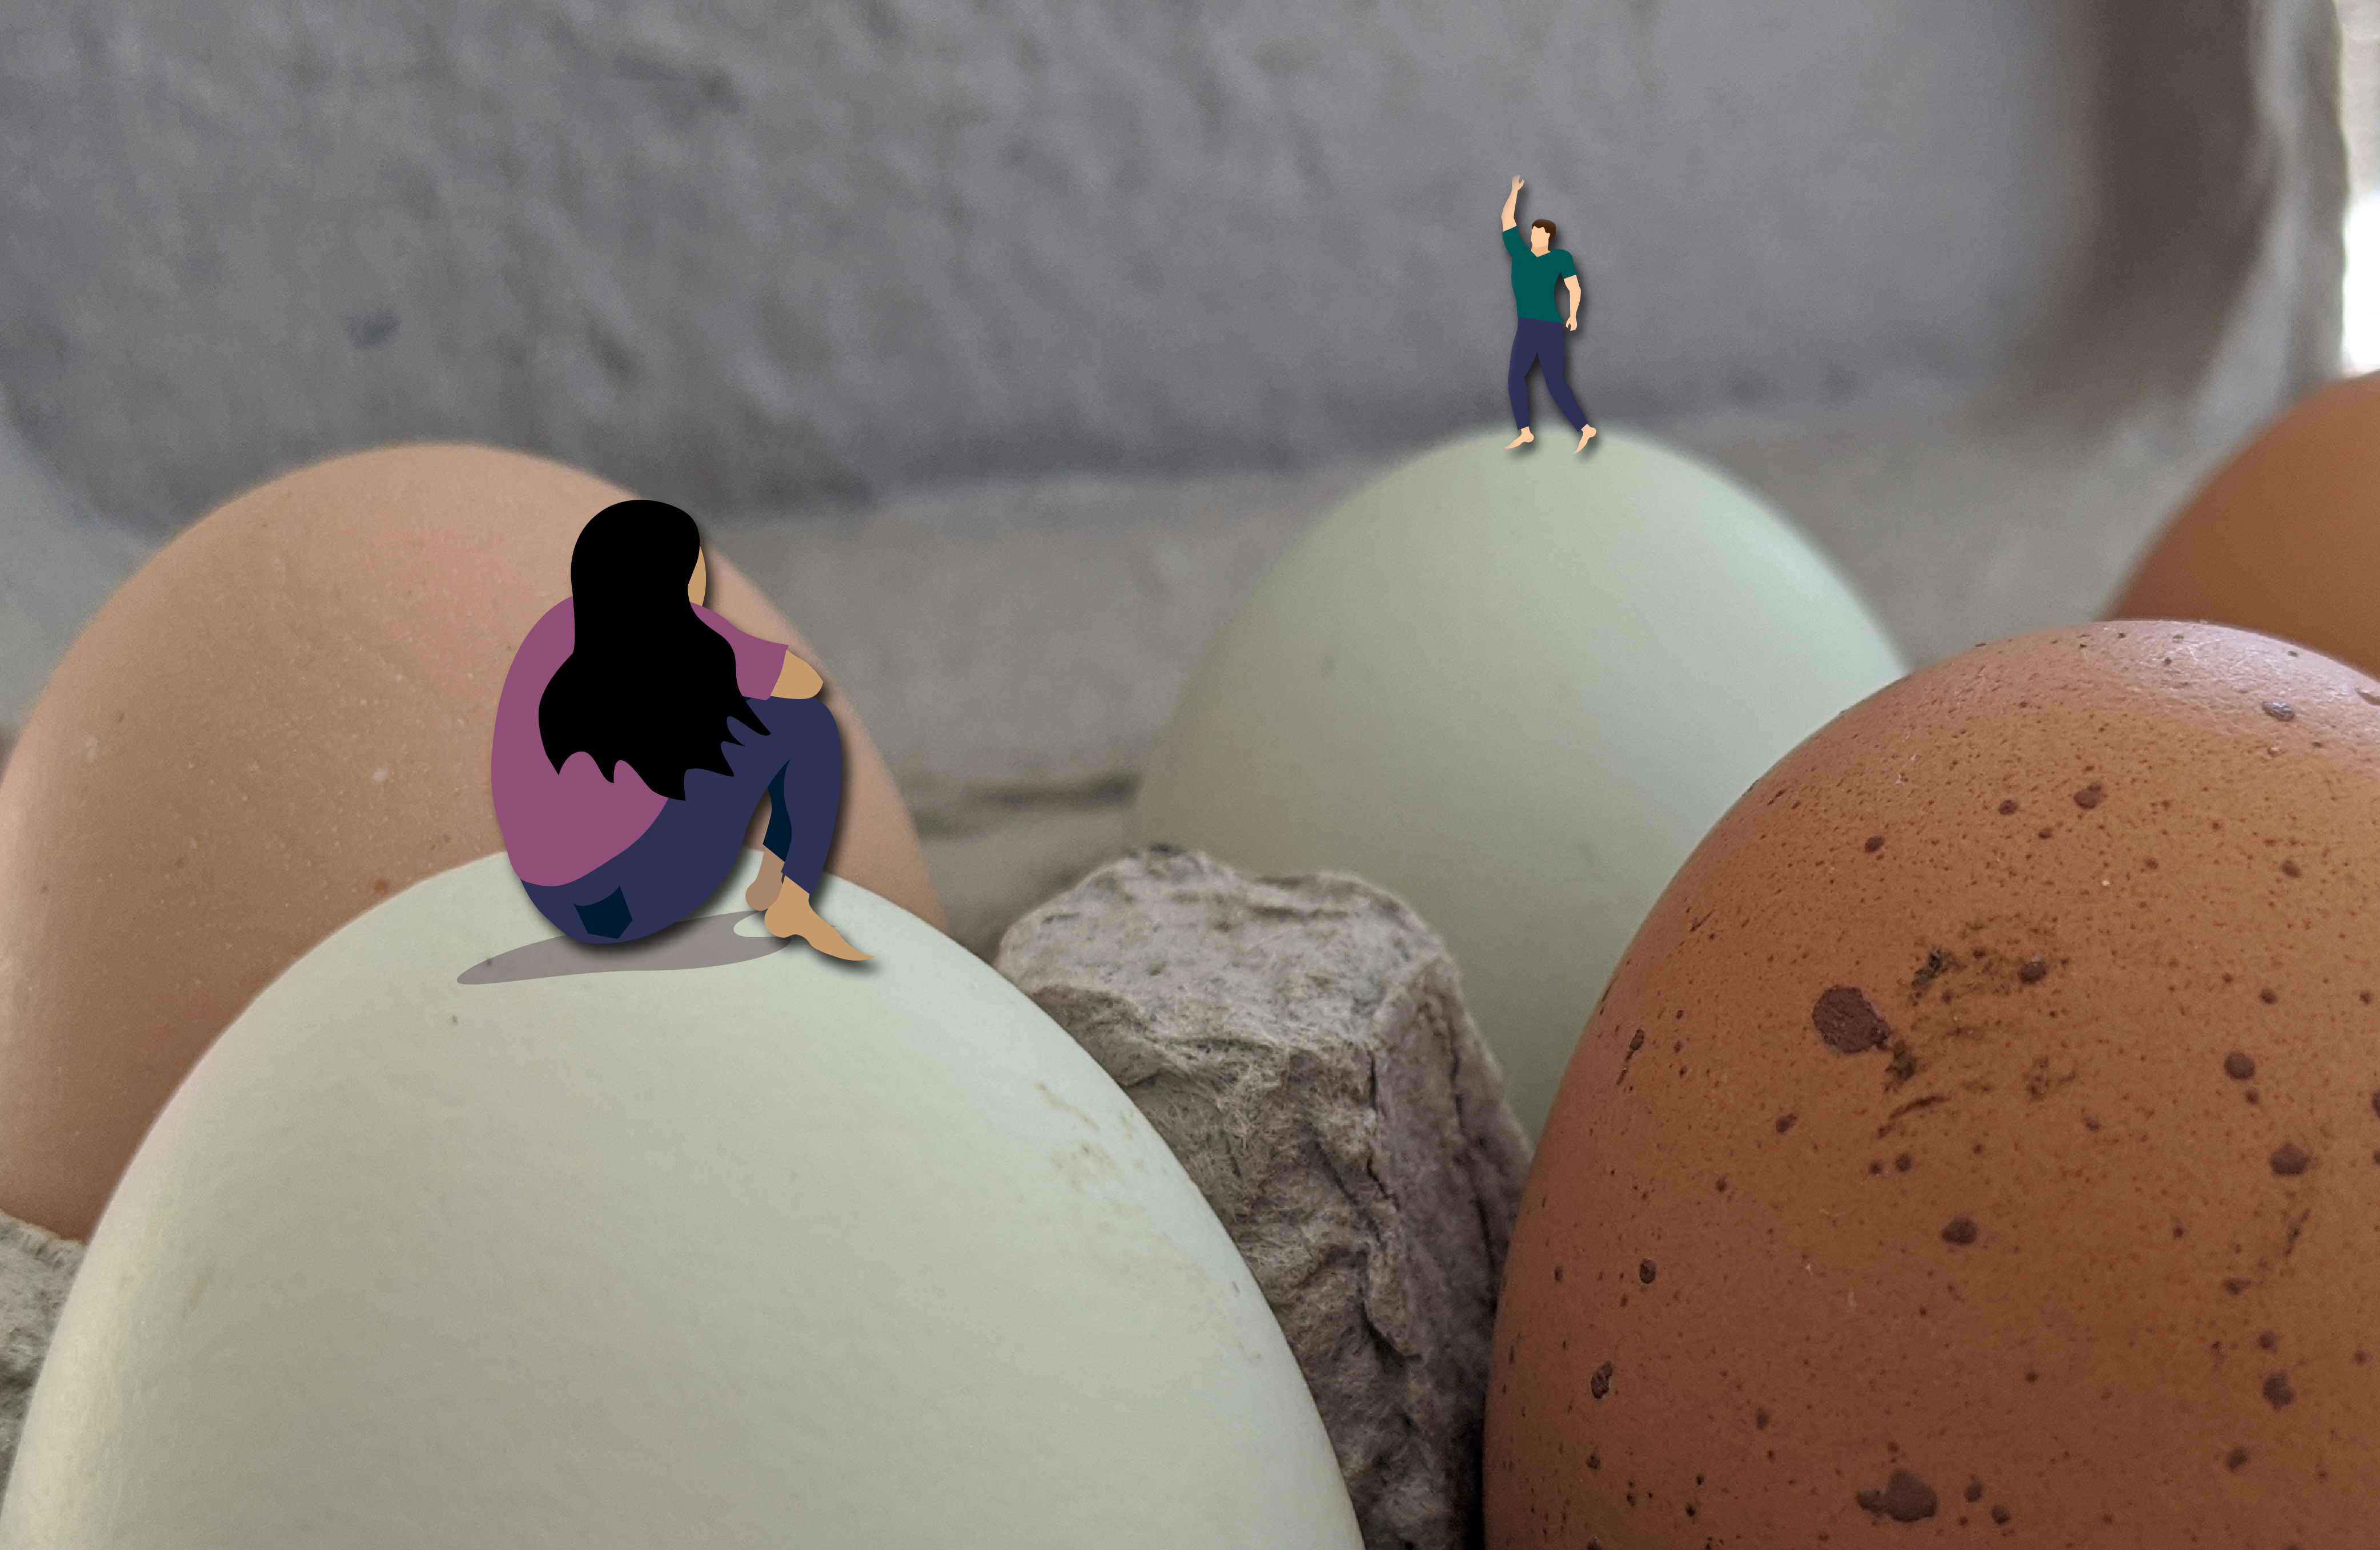 Collage style art depicting two tiny people waving at each other from separate eggs in a carton.